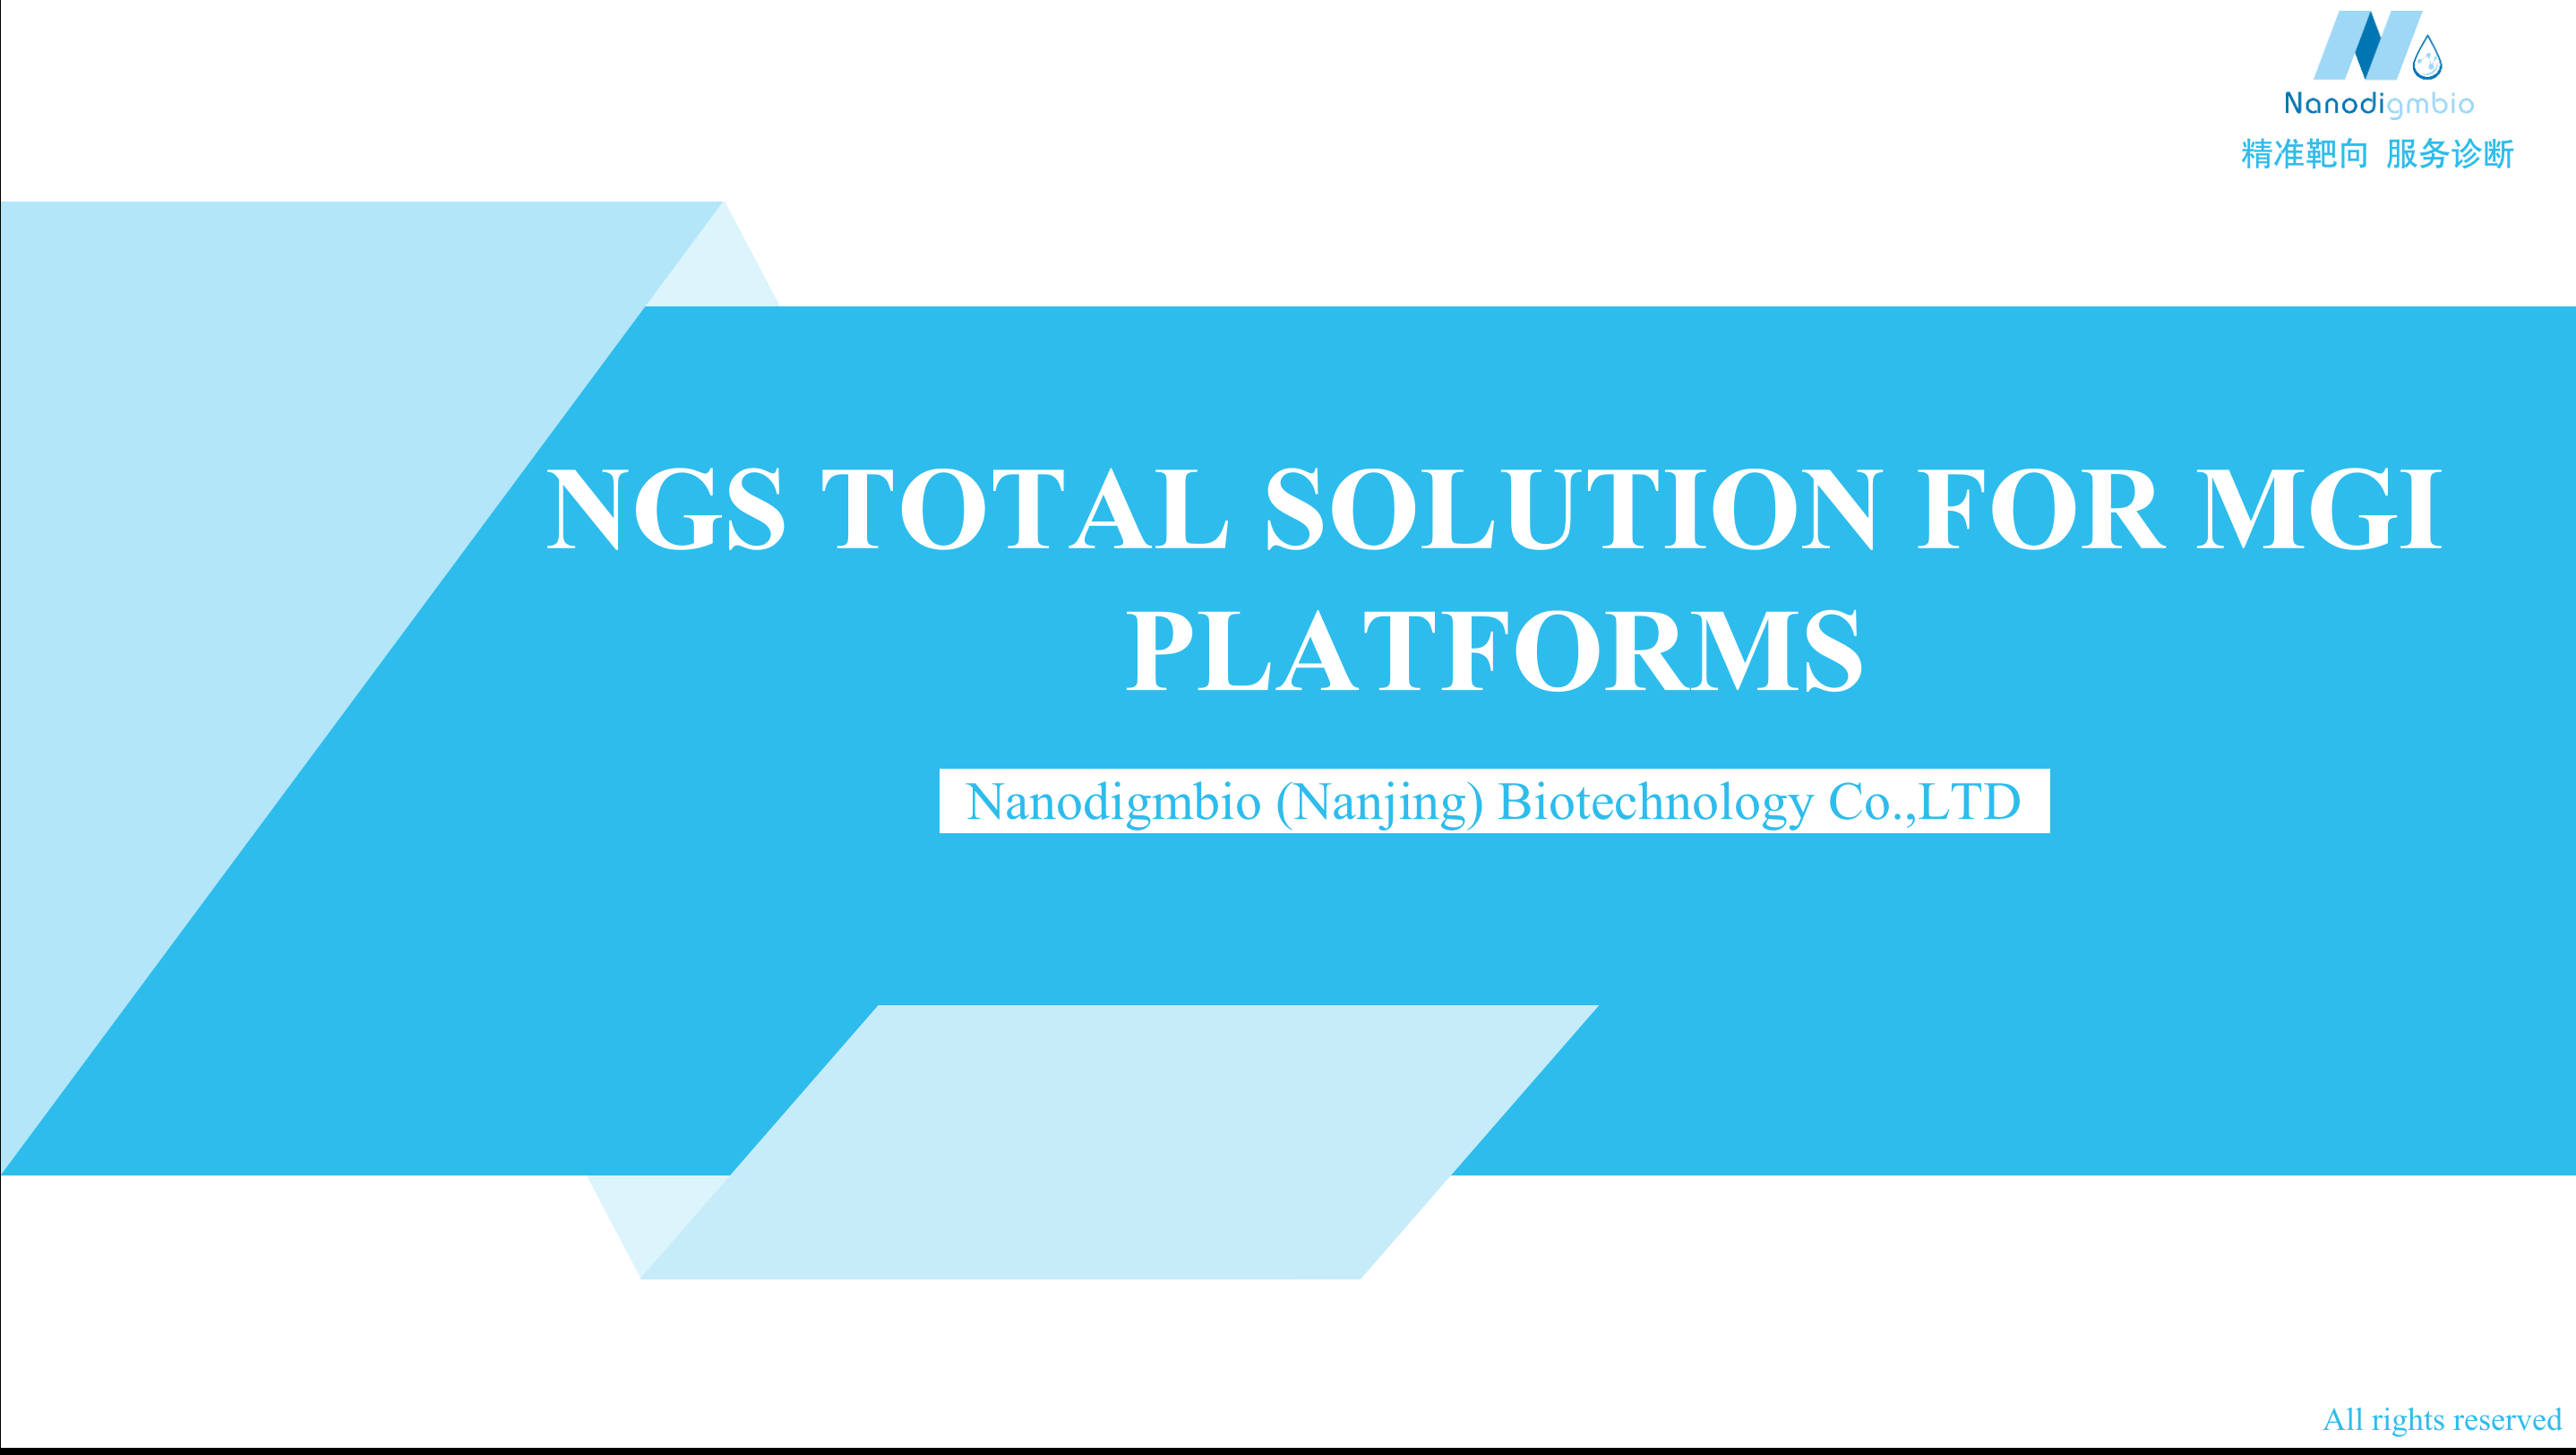 NGS Total Solution for MGI Platforms